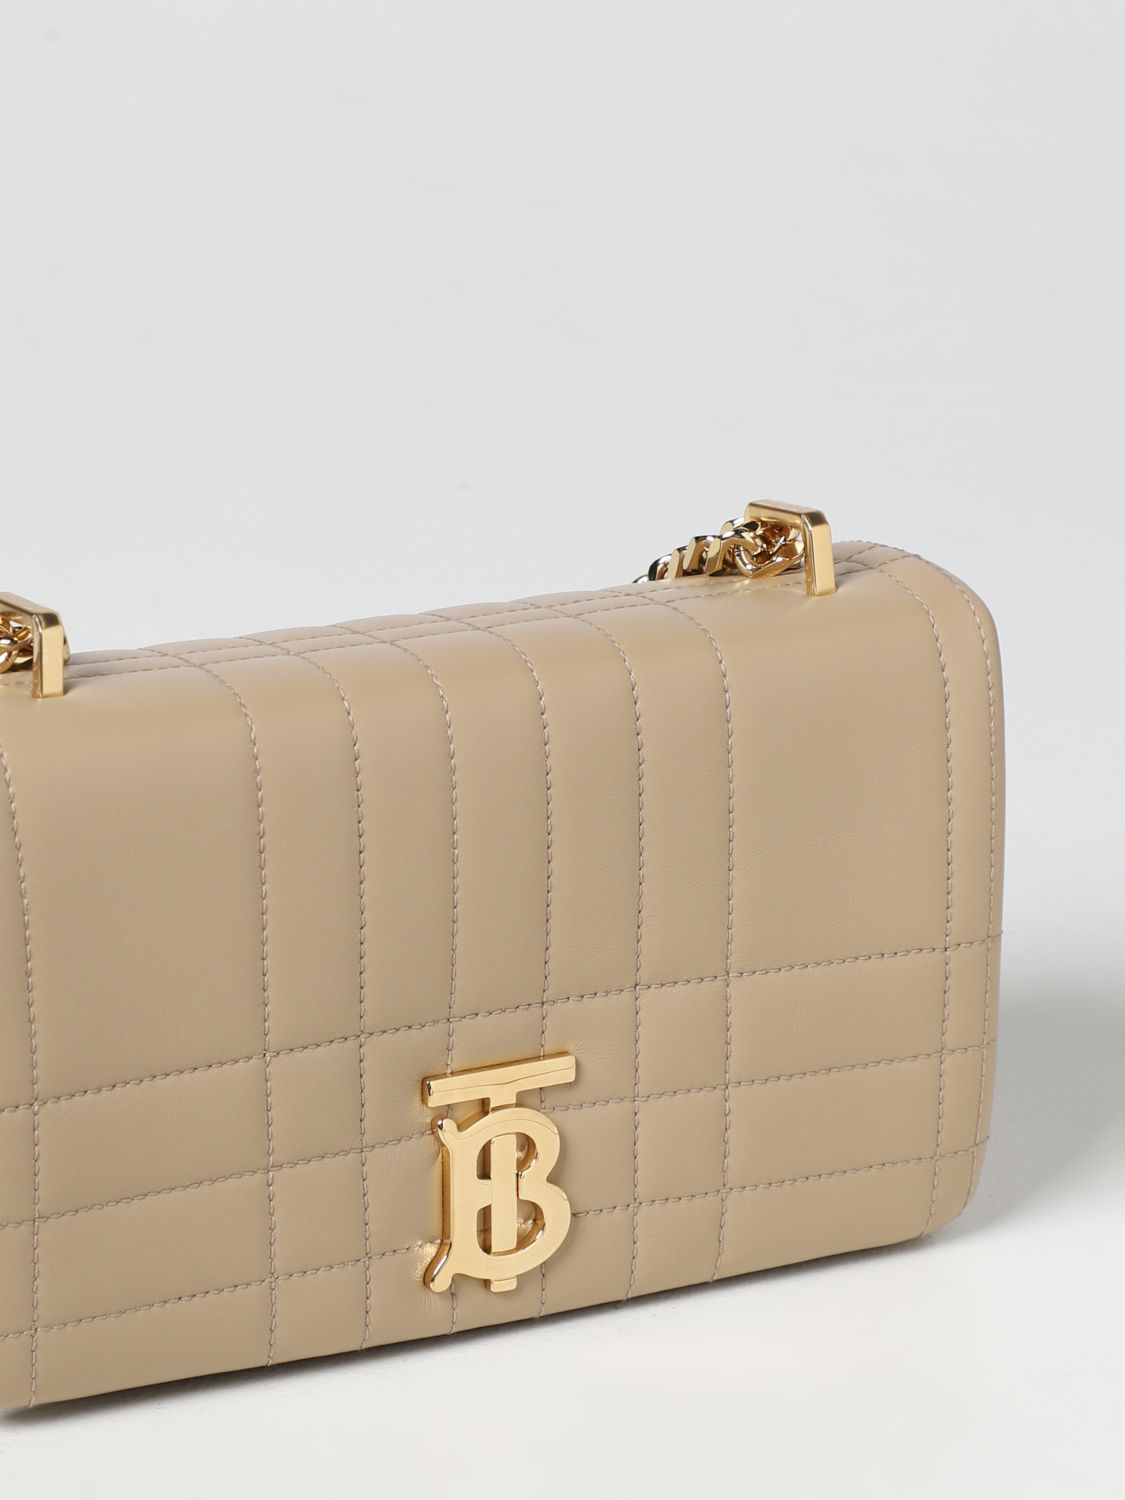 BURBERRY: Lola bag in quilted leather - Beige  Burberry shoulder bag  8063008 online at